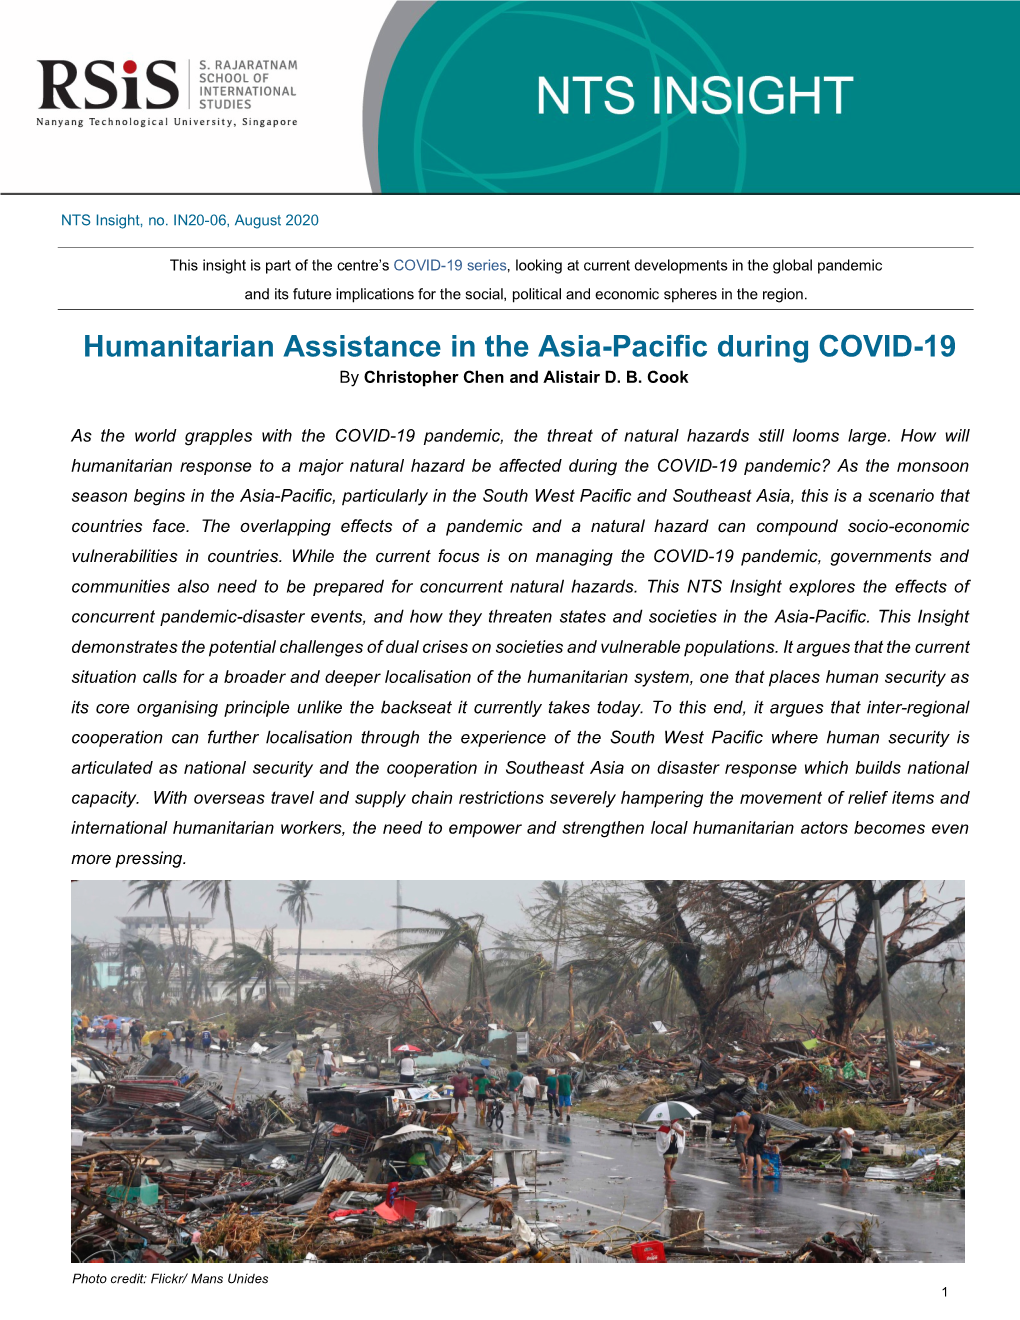 NTS Insight- Humanitarian Assistance in the Asia-Pacific During COVID-19